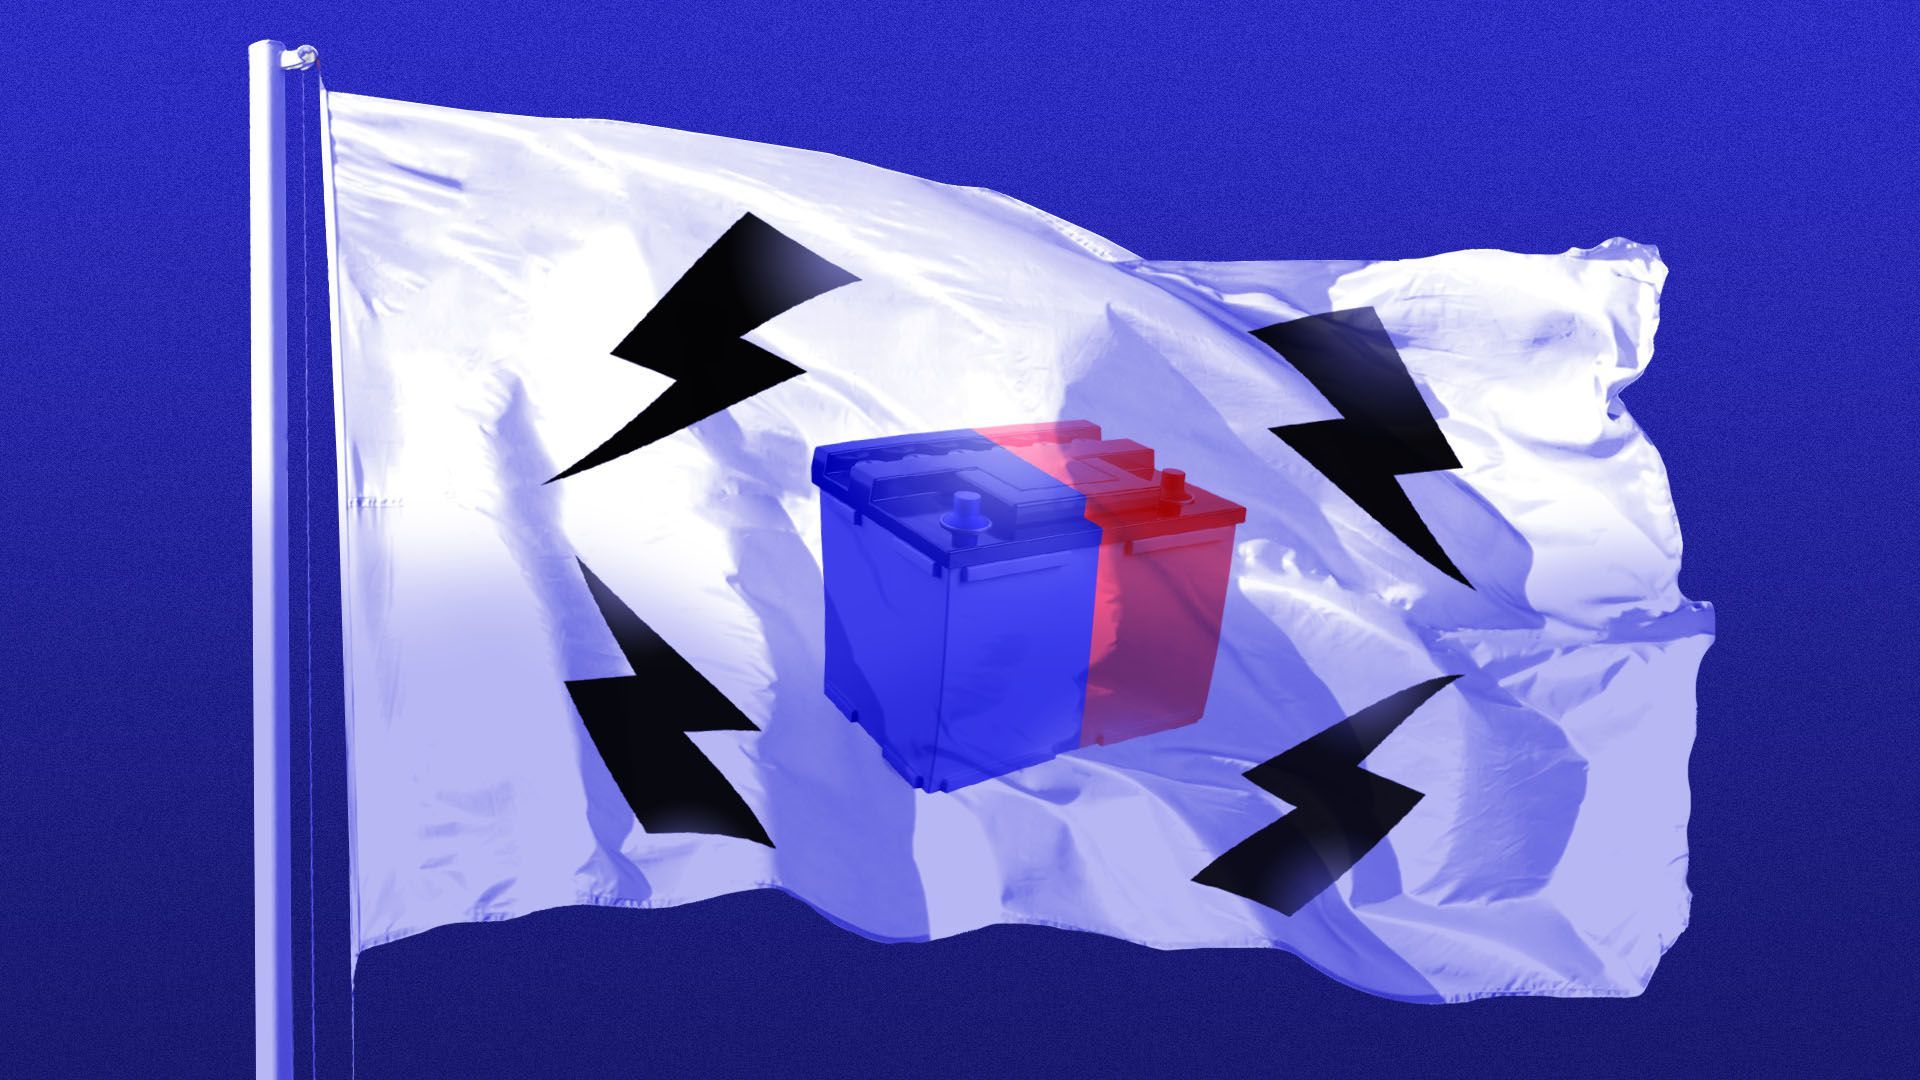 Illustration of a flag resembling the South Korean flag featuring a blue and red battery surrounded by four lightning bolts